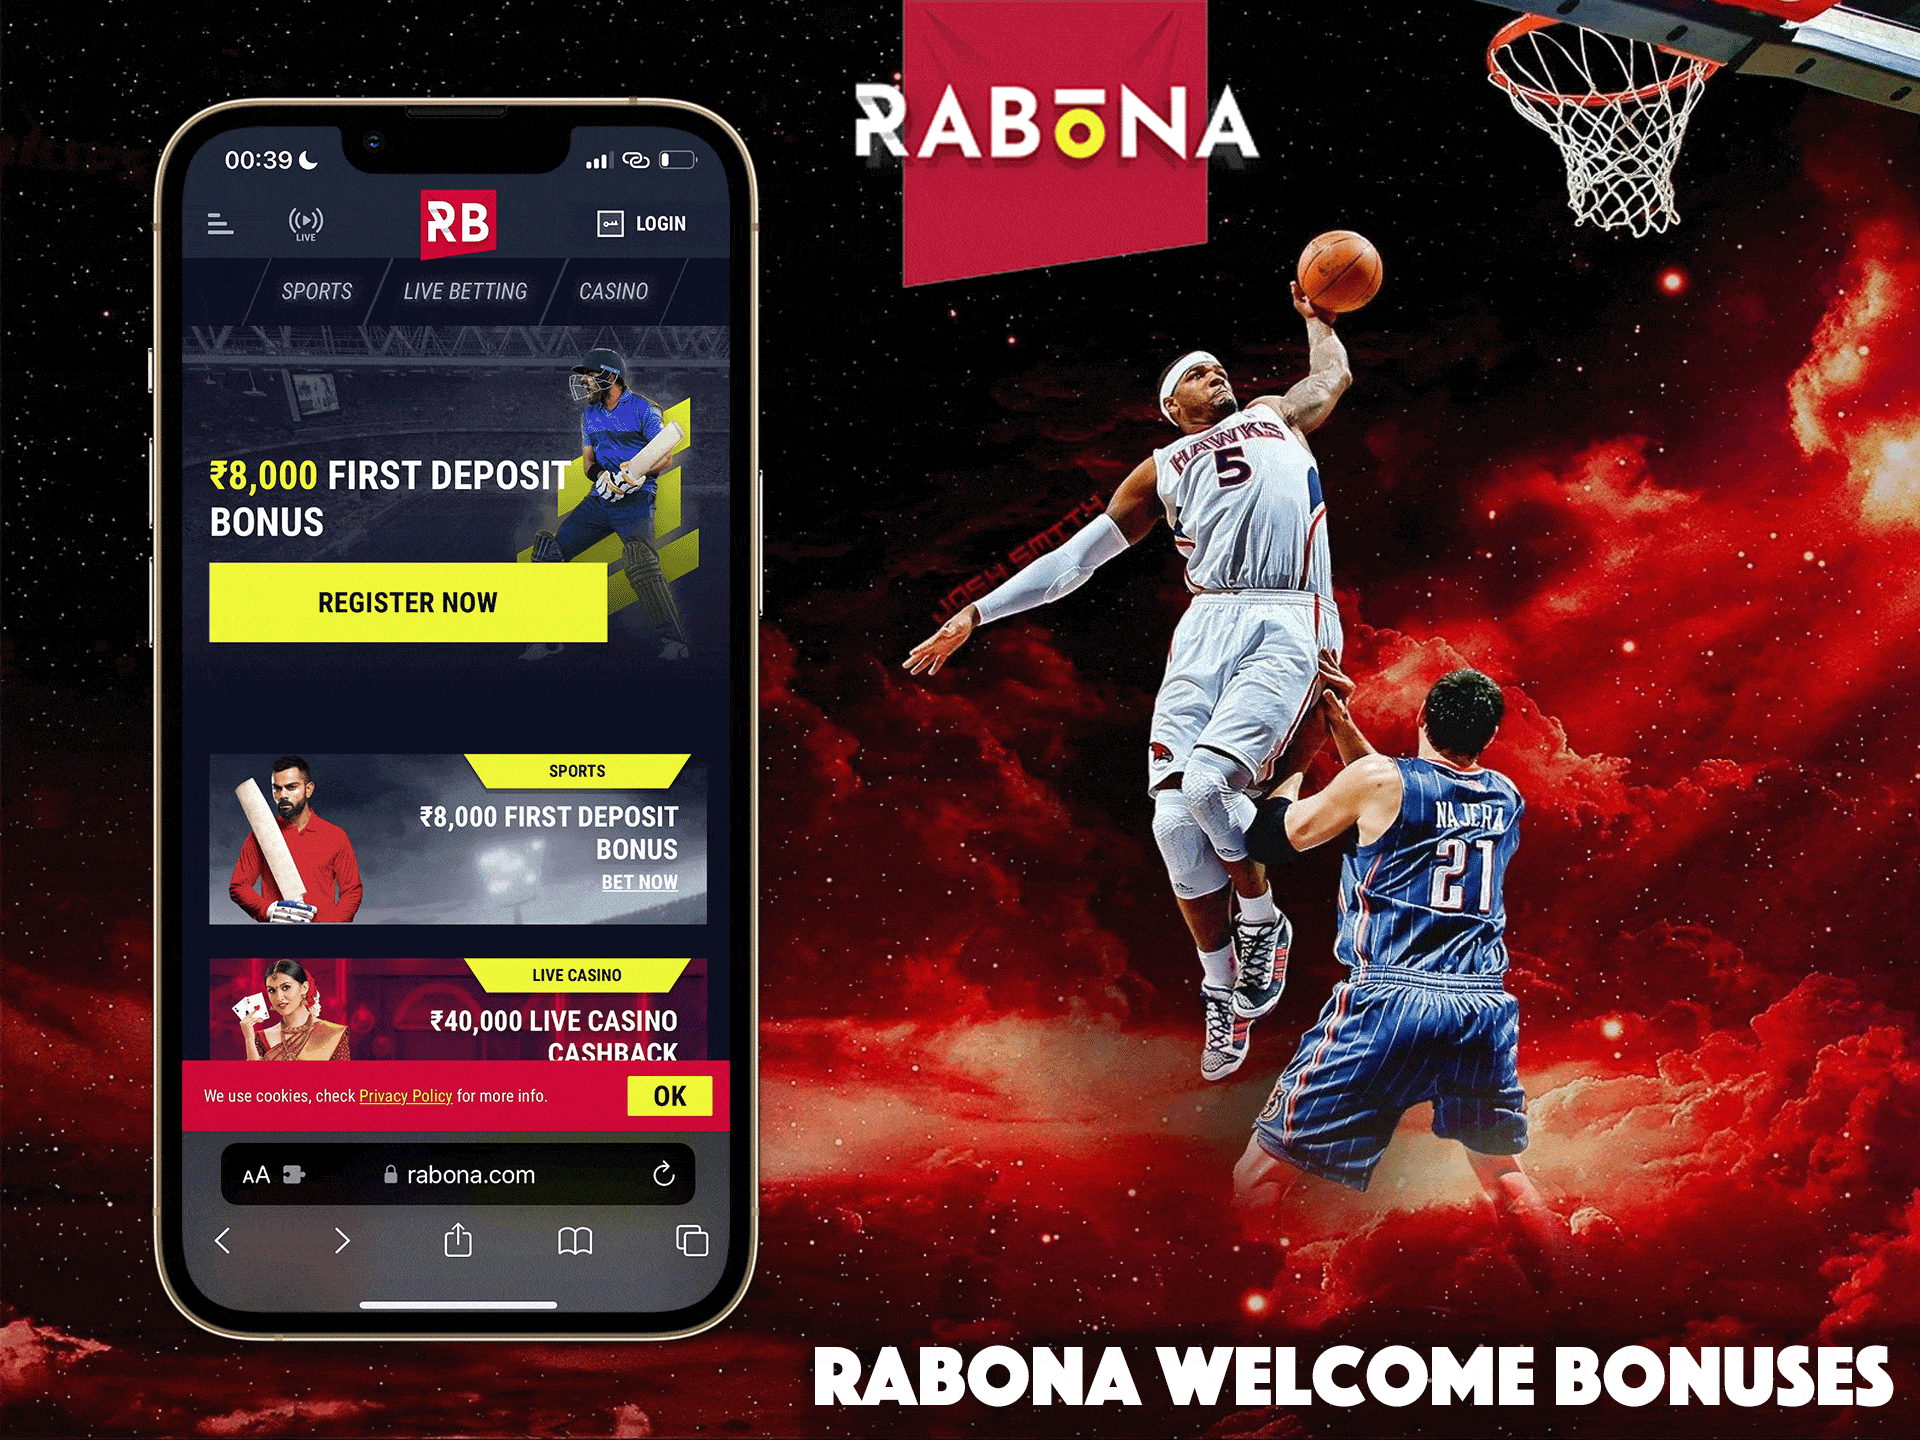 How to get a bonus when registering with Rabona.